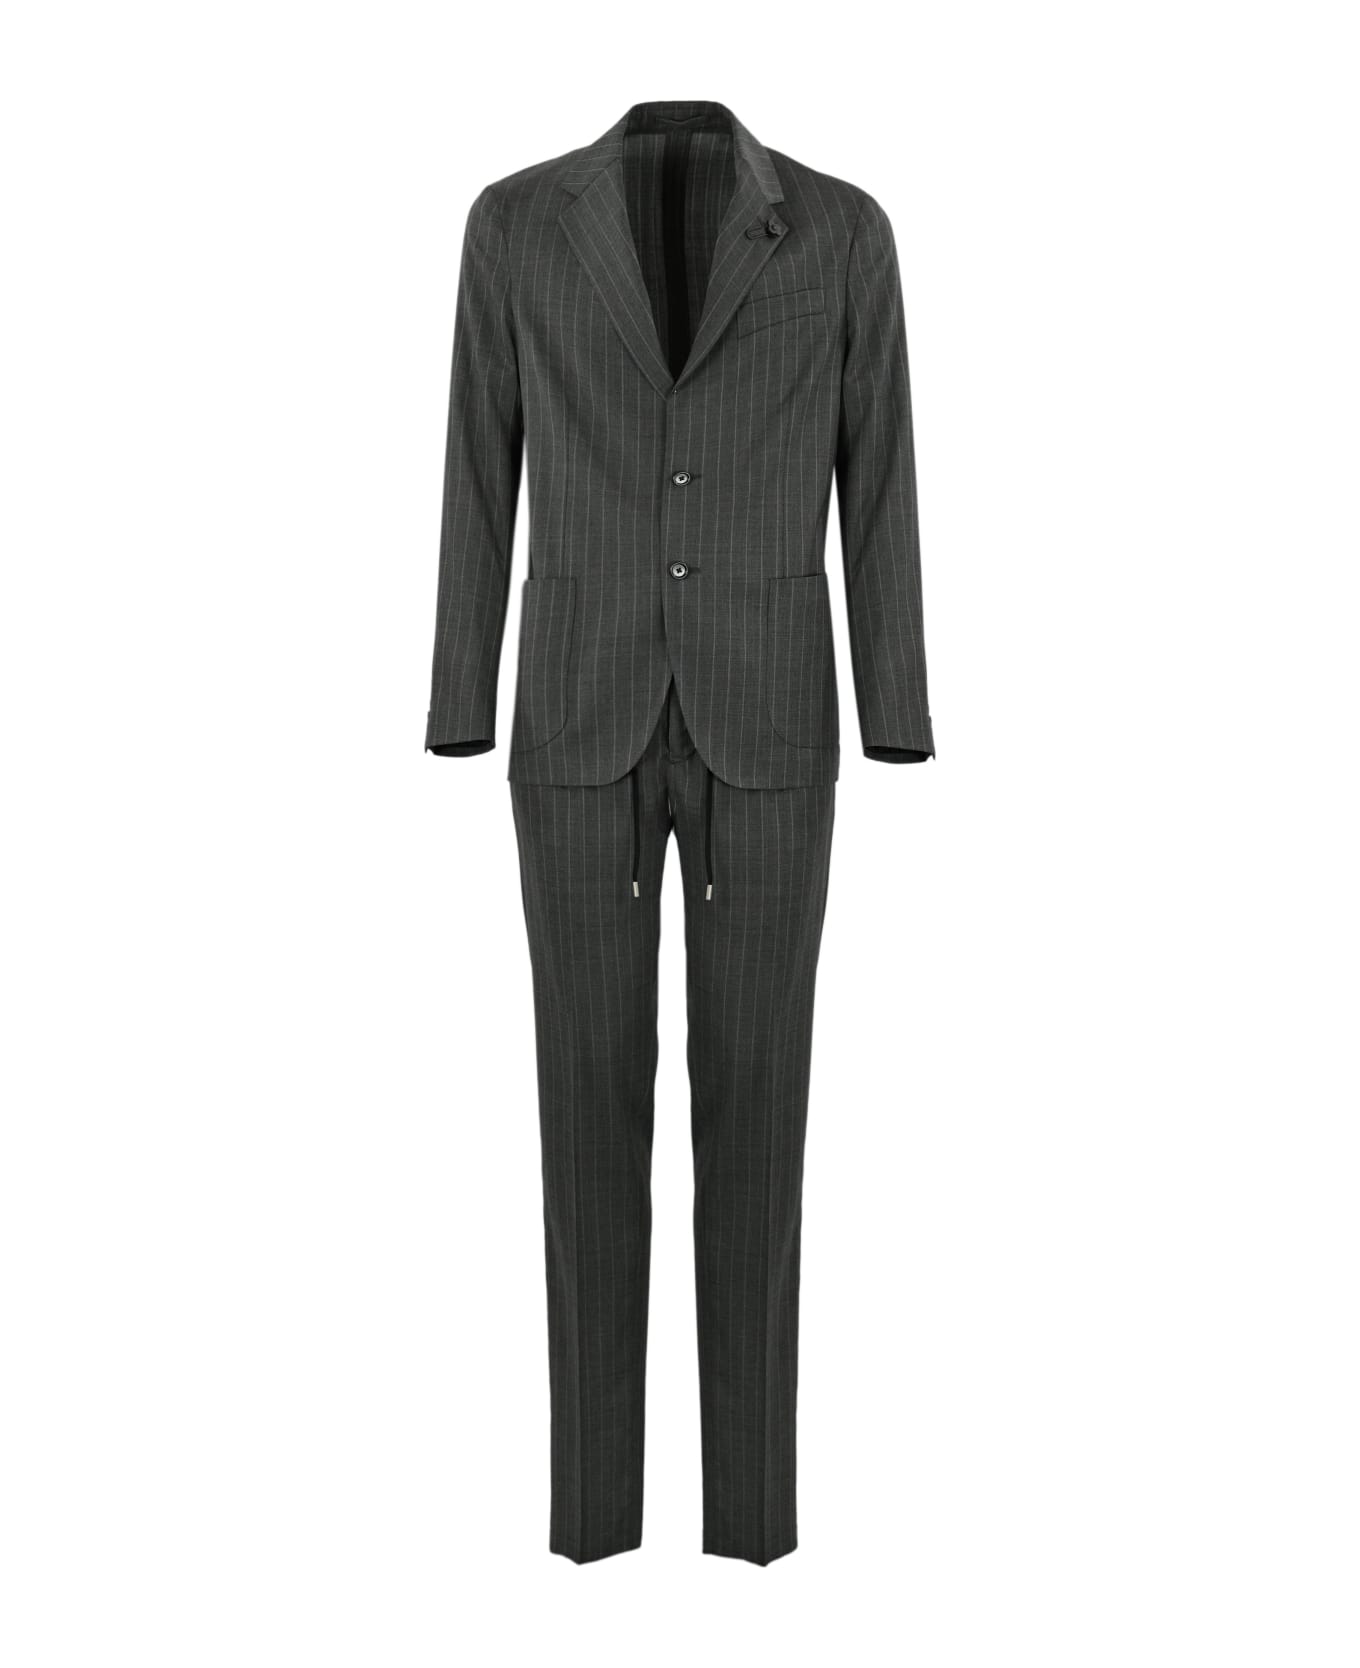 Lardini Pinstriped Suit With Lace-up Trousers - Grigio スーツ